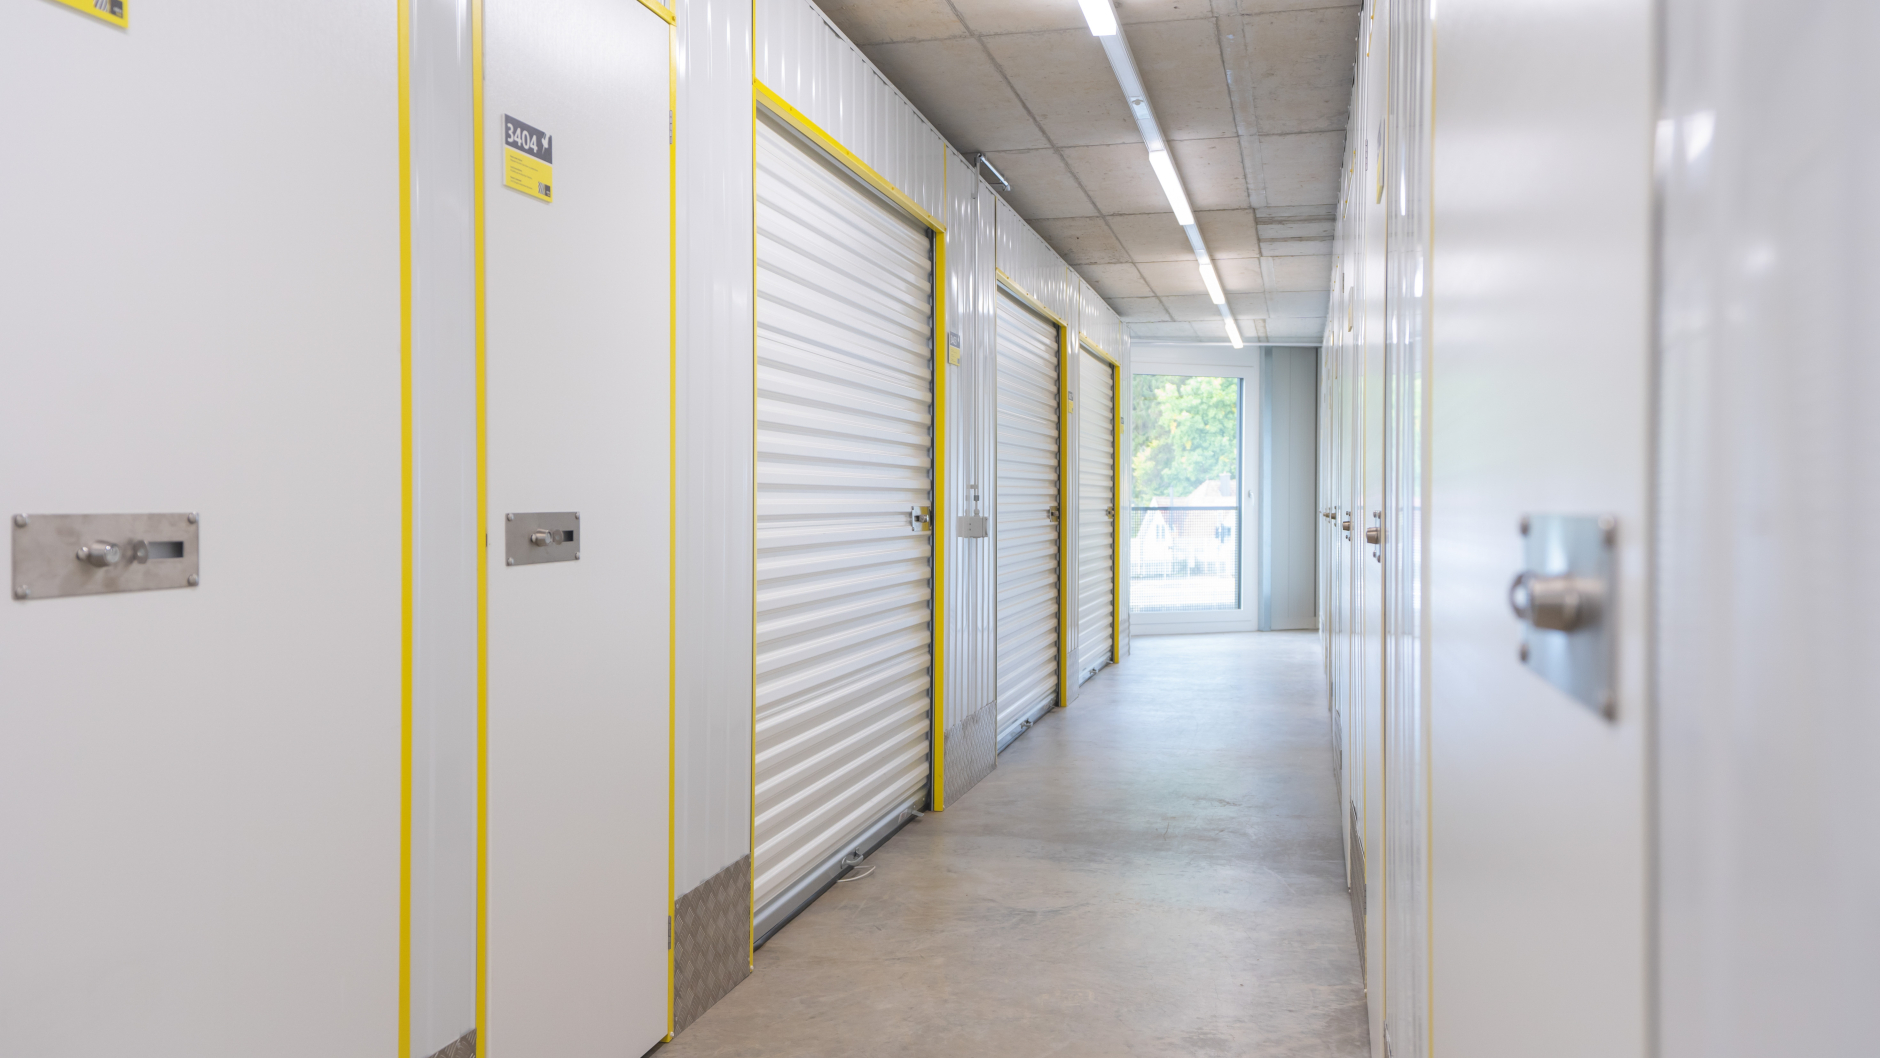 Interior view of the Zebrabox warehouse with individual storage units. The walls are made of sturdy white steel with yellow-edged doors.